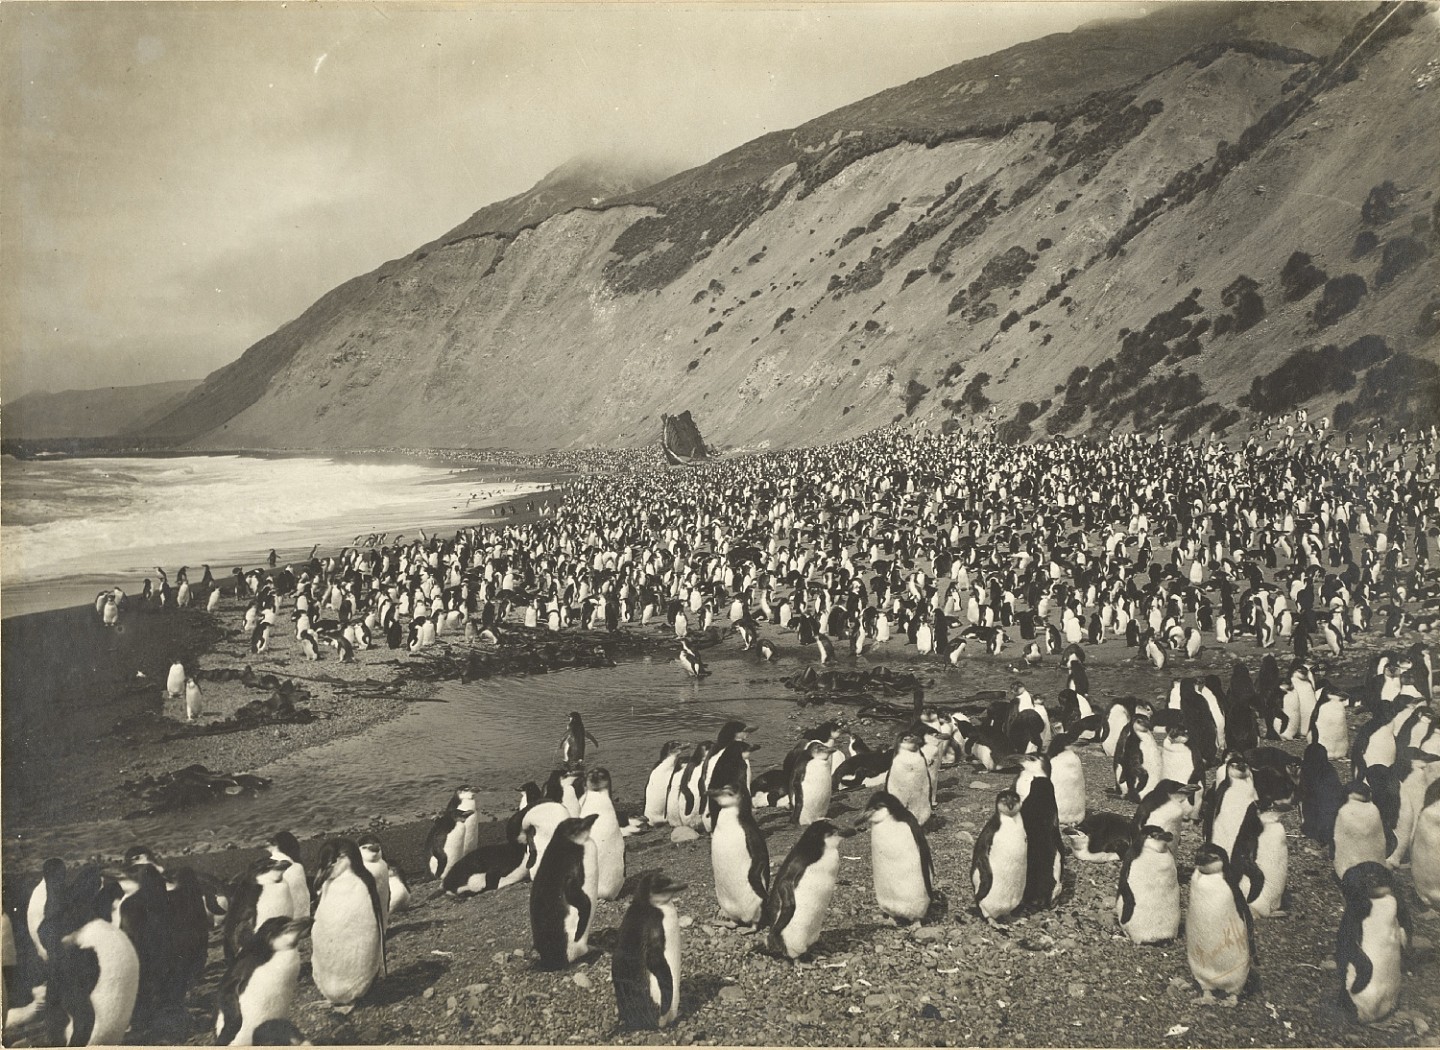 Thousands of penguins stand on a beach while cliffs rear up behind them.